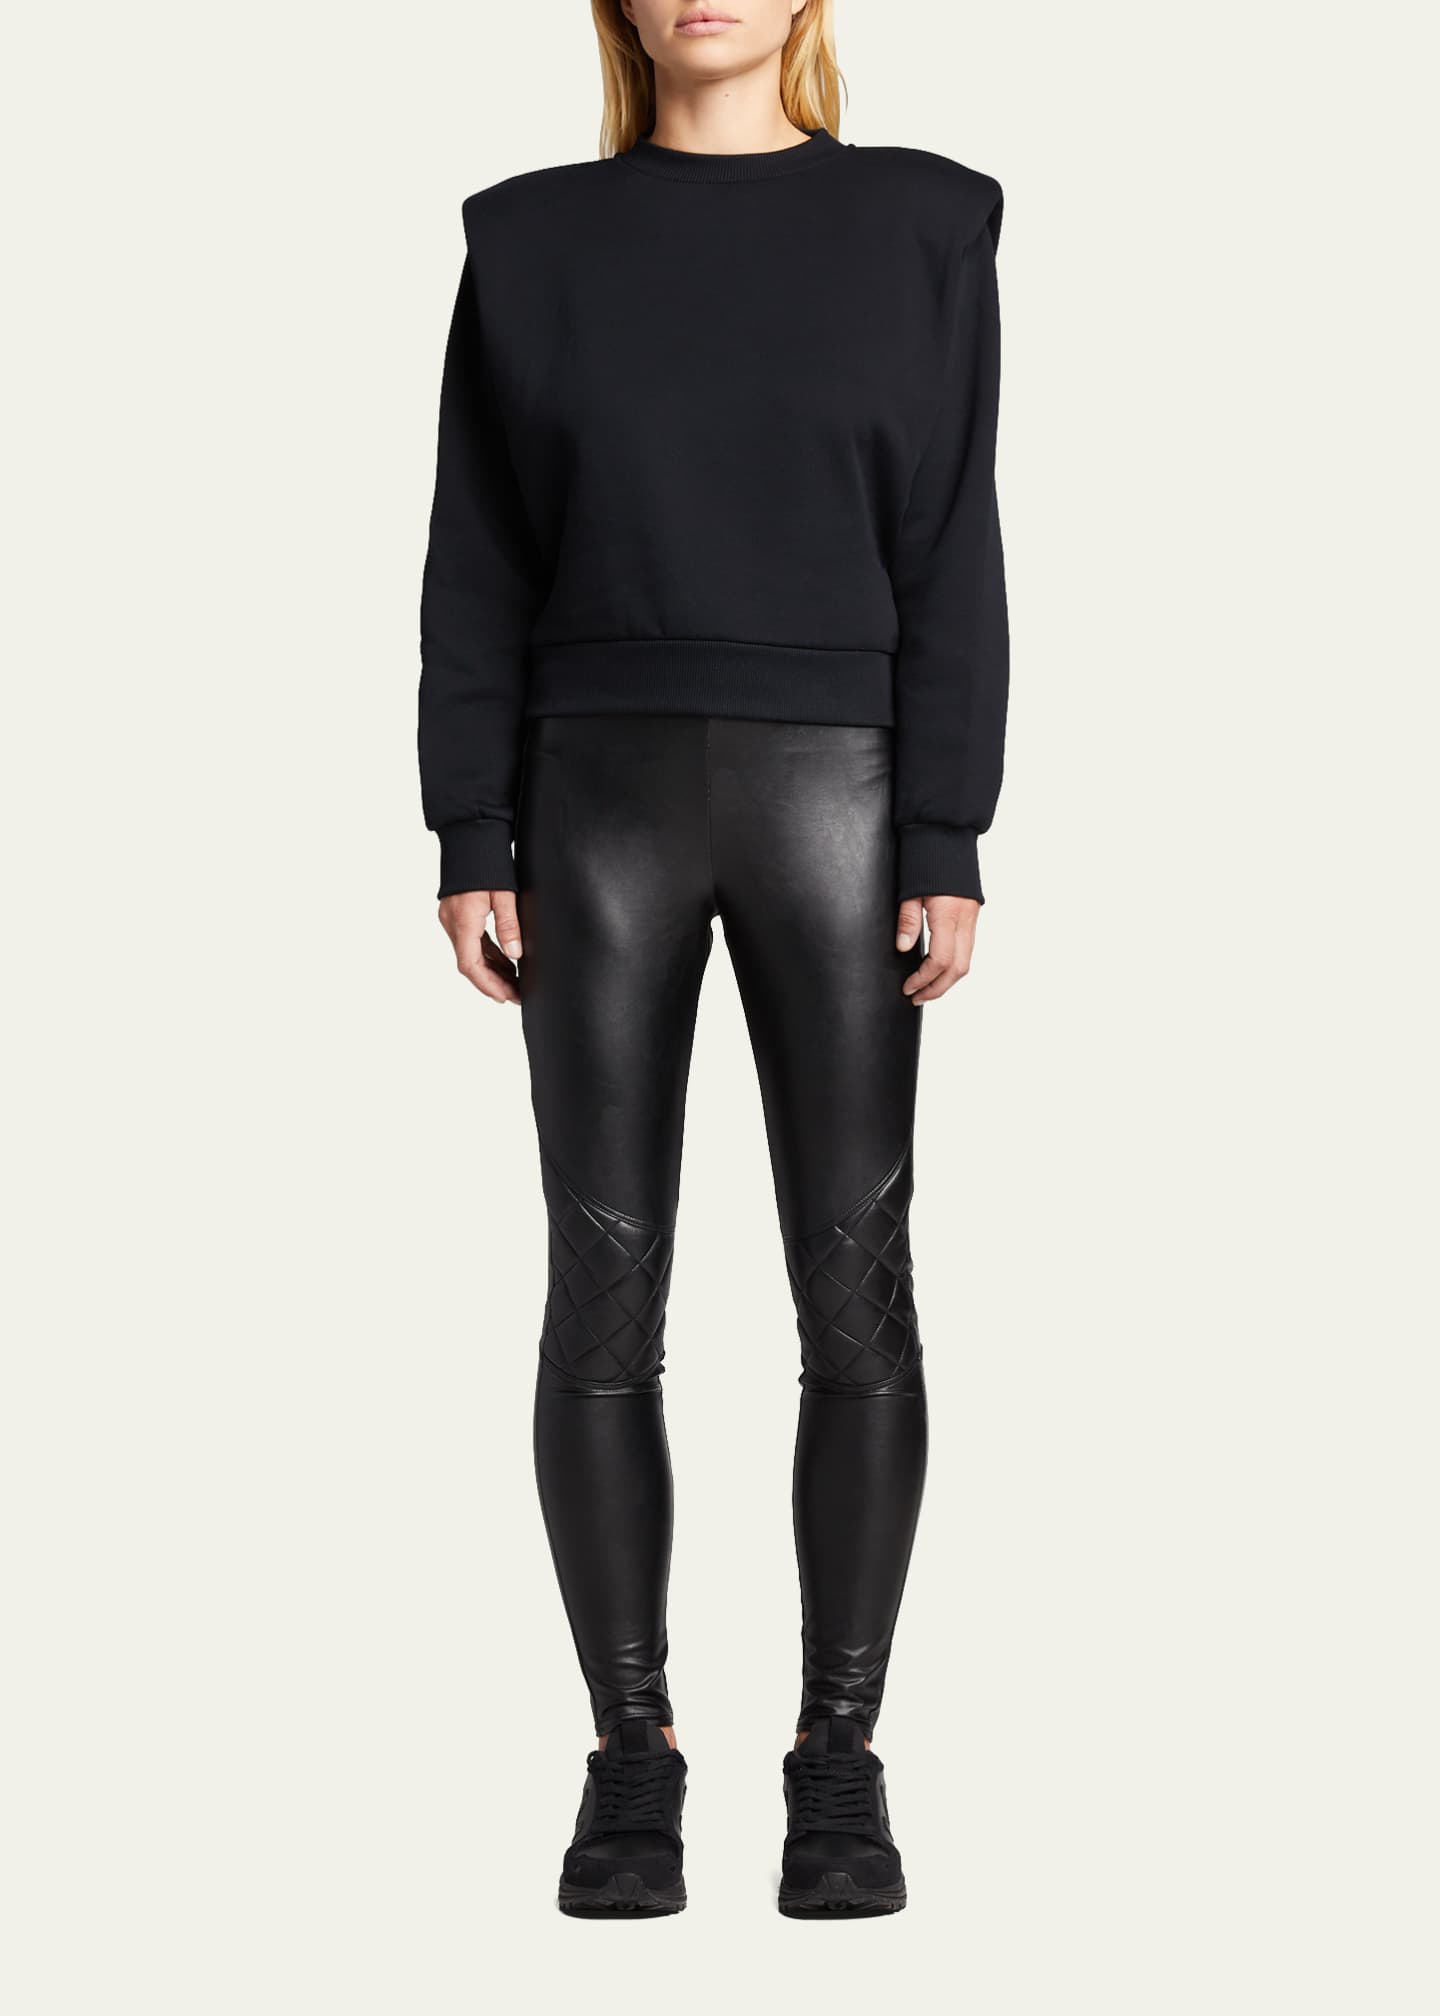 Blanc Noir Faux-Leather Quilted Leggings - Bergdorf Goodman